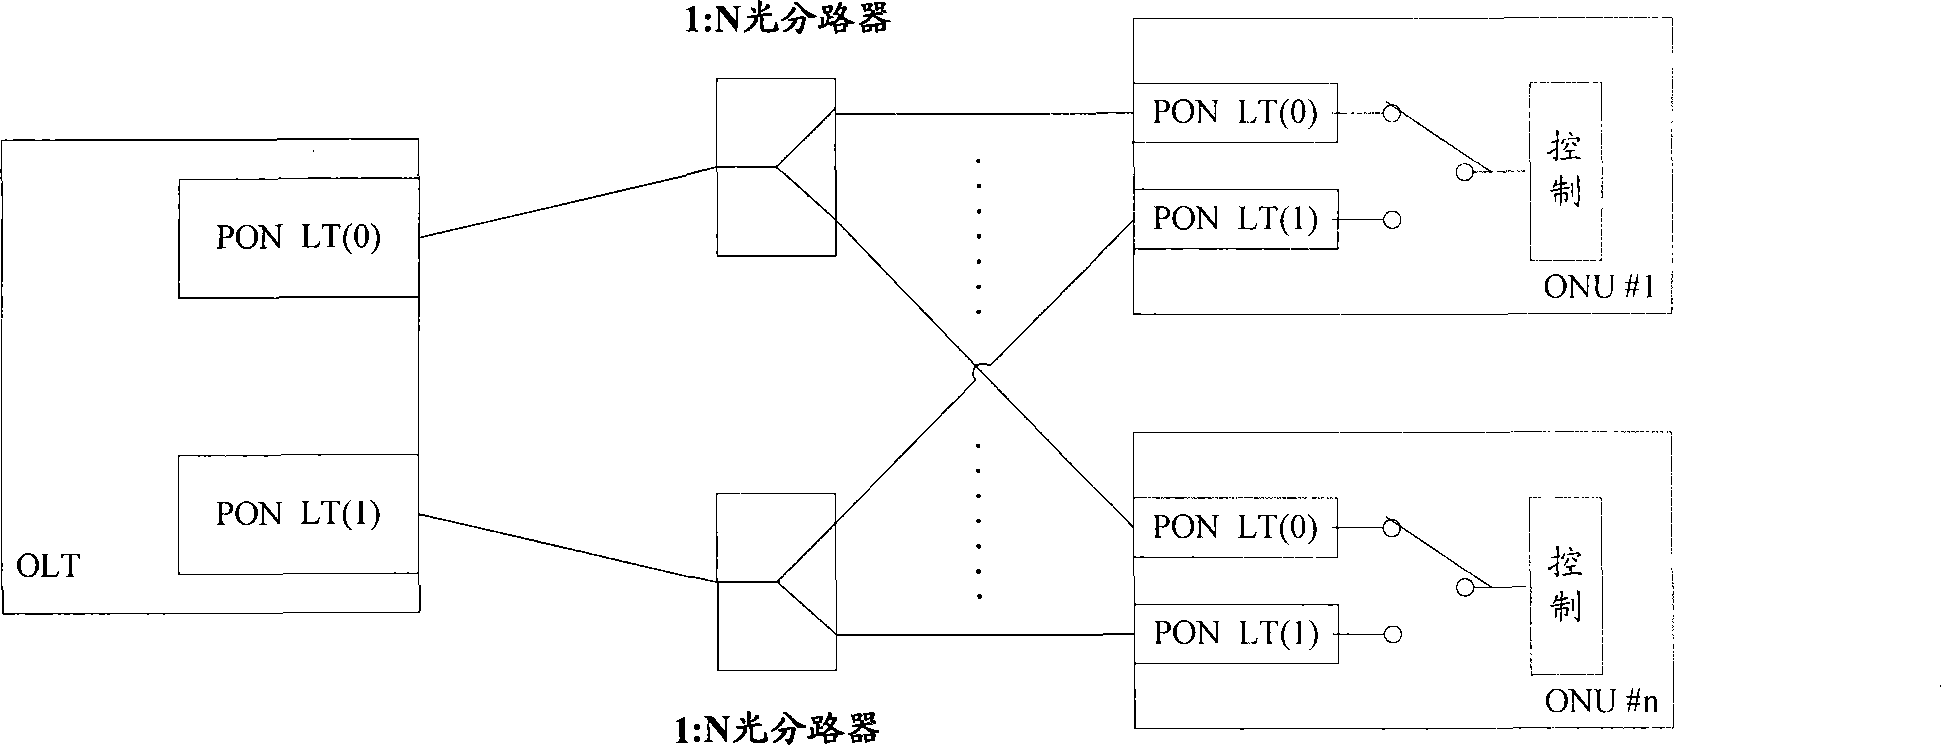 Protection switching method and device in Ethernet passive optical network